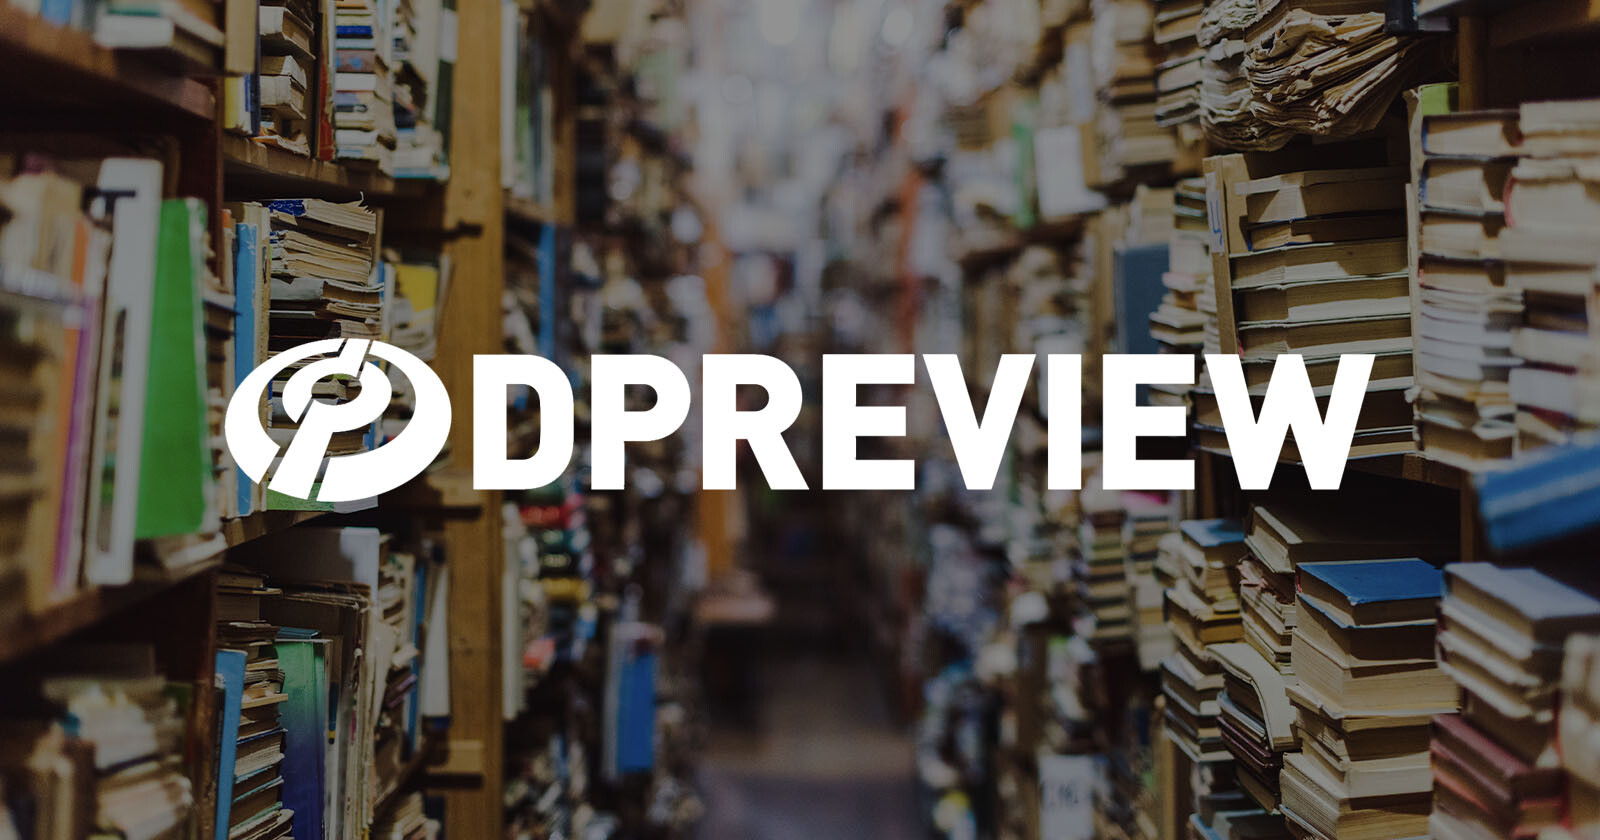  dpreview will remain available archive after closes 